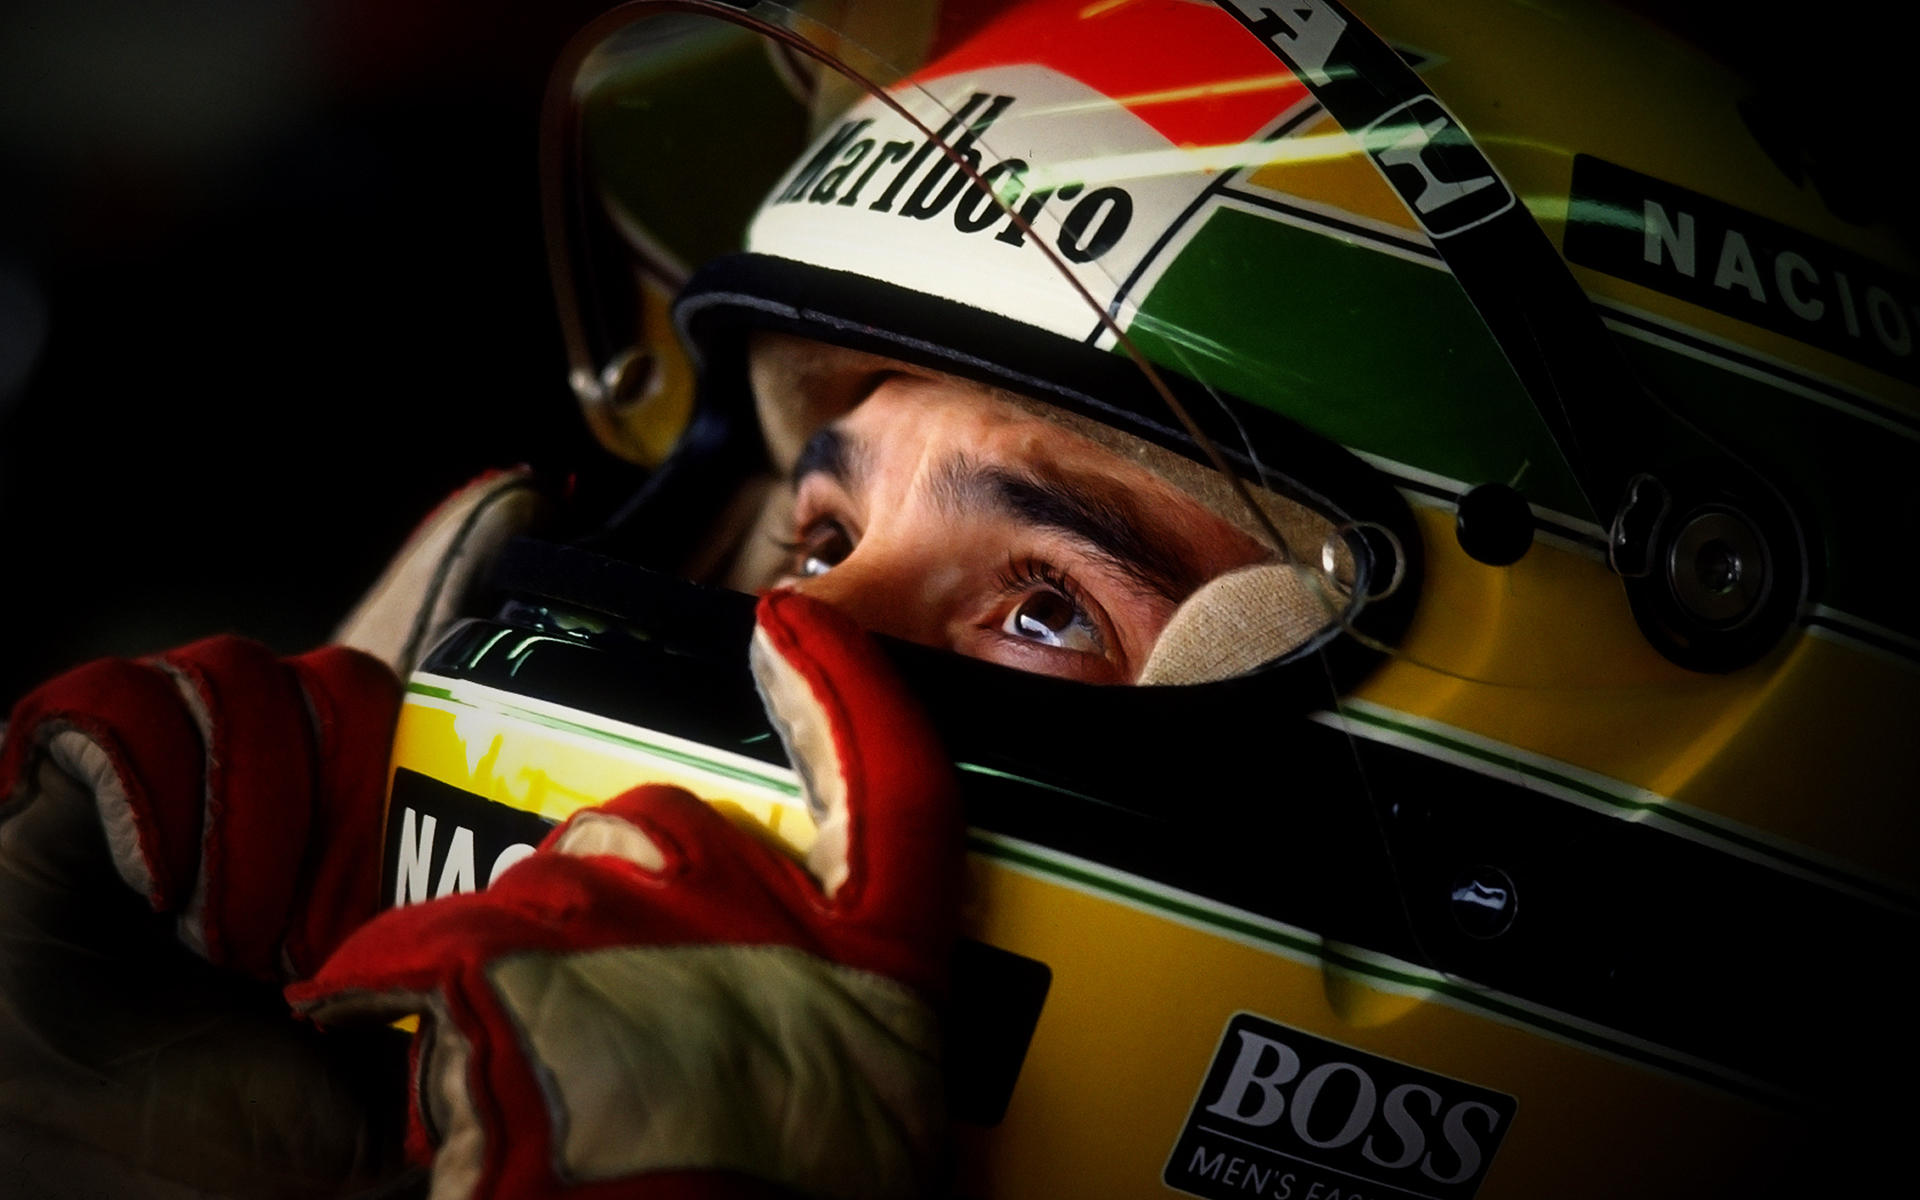 10 Great Ayrton Senna Quotes to Motivate You | DrivingLine